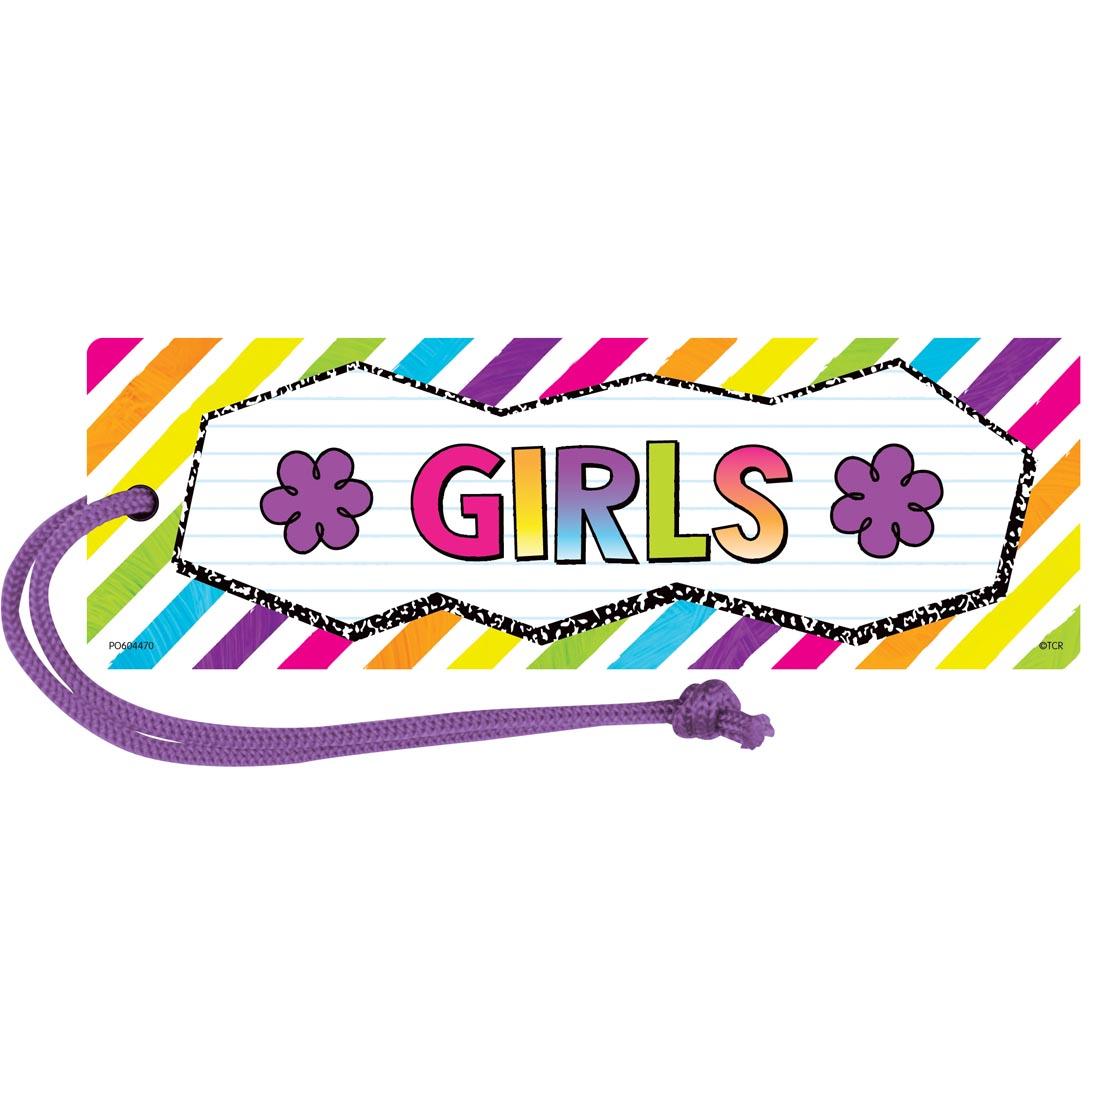 Magnetic Girls Pass from the Brights 4Ever collection by Teacher Created Resources